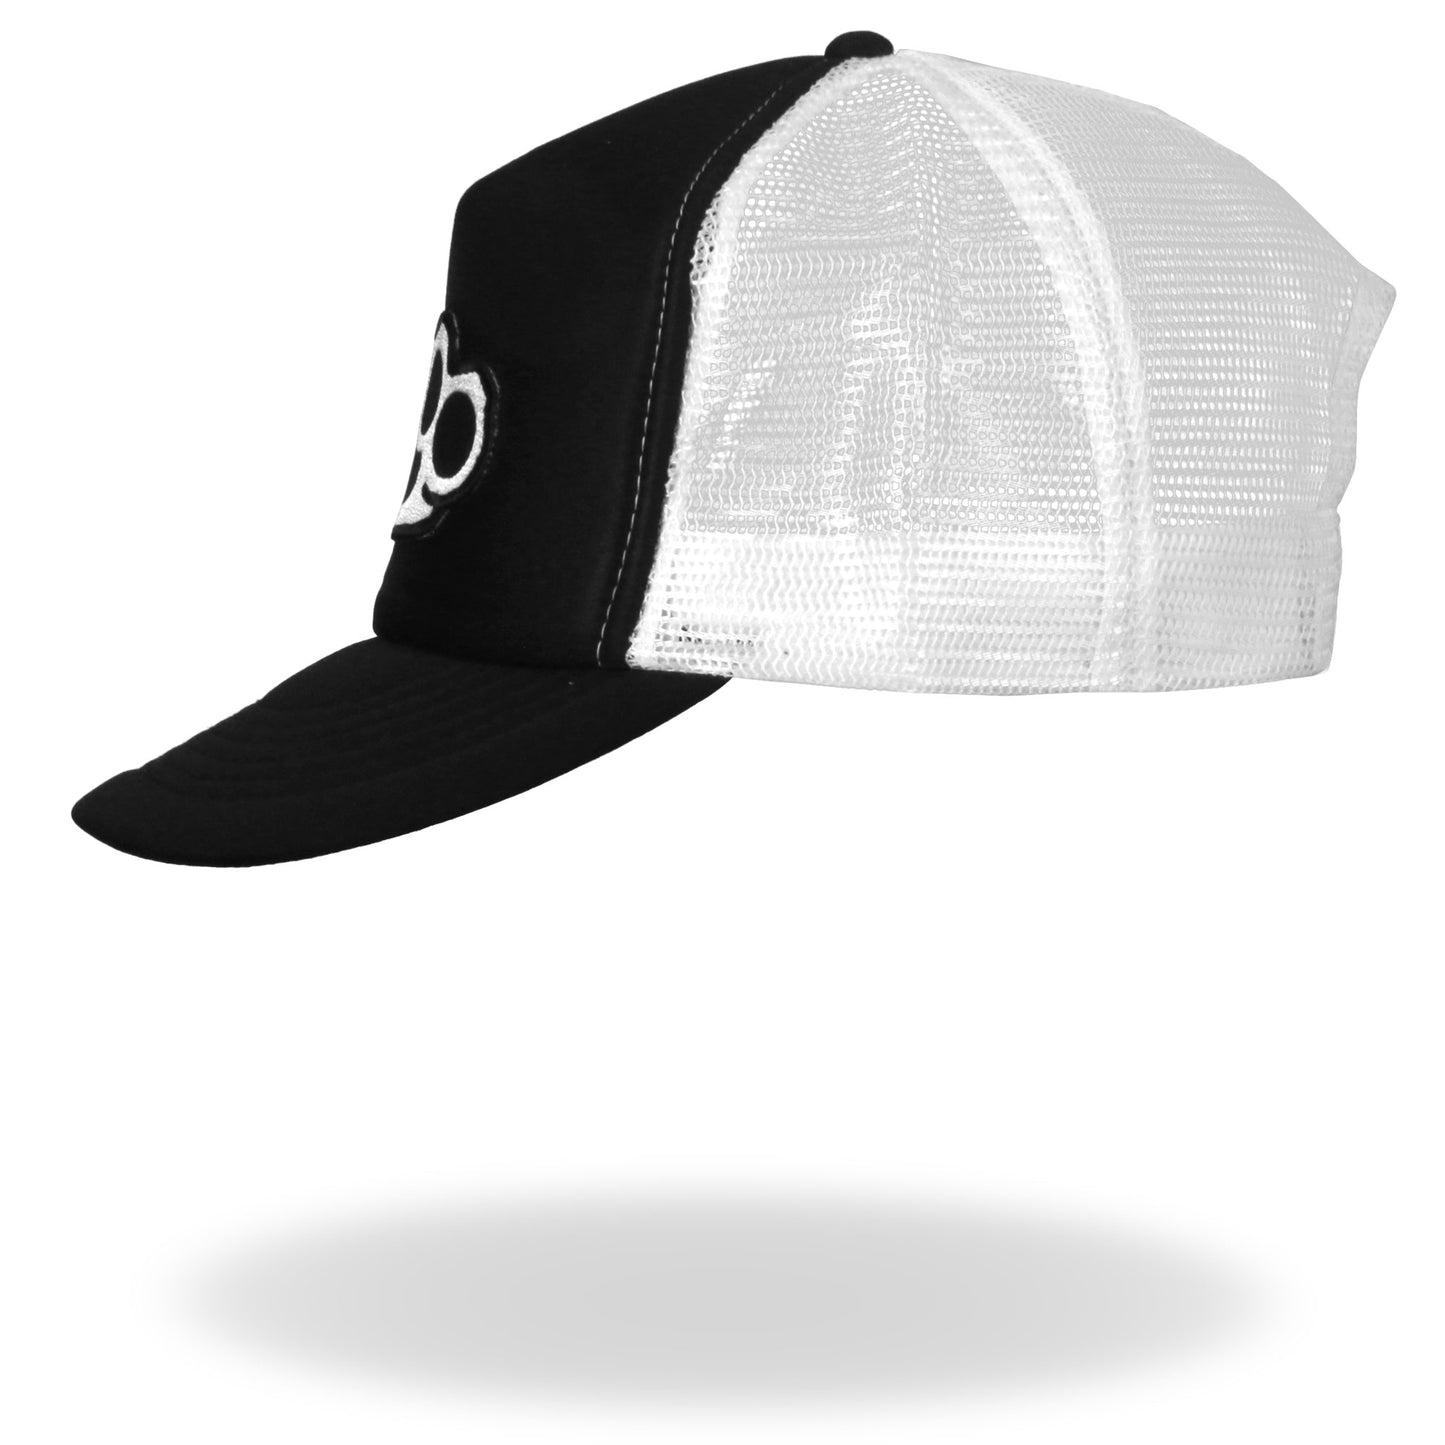 Hot Leathers GSH1009 Knuckles Black and White Trucker Hat